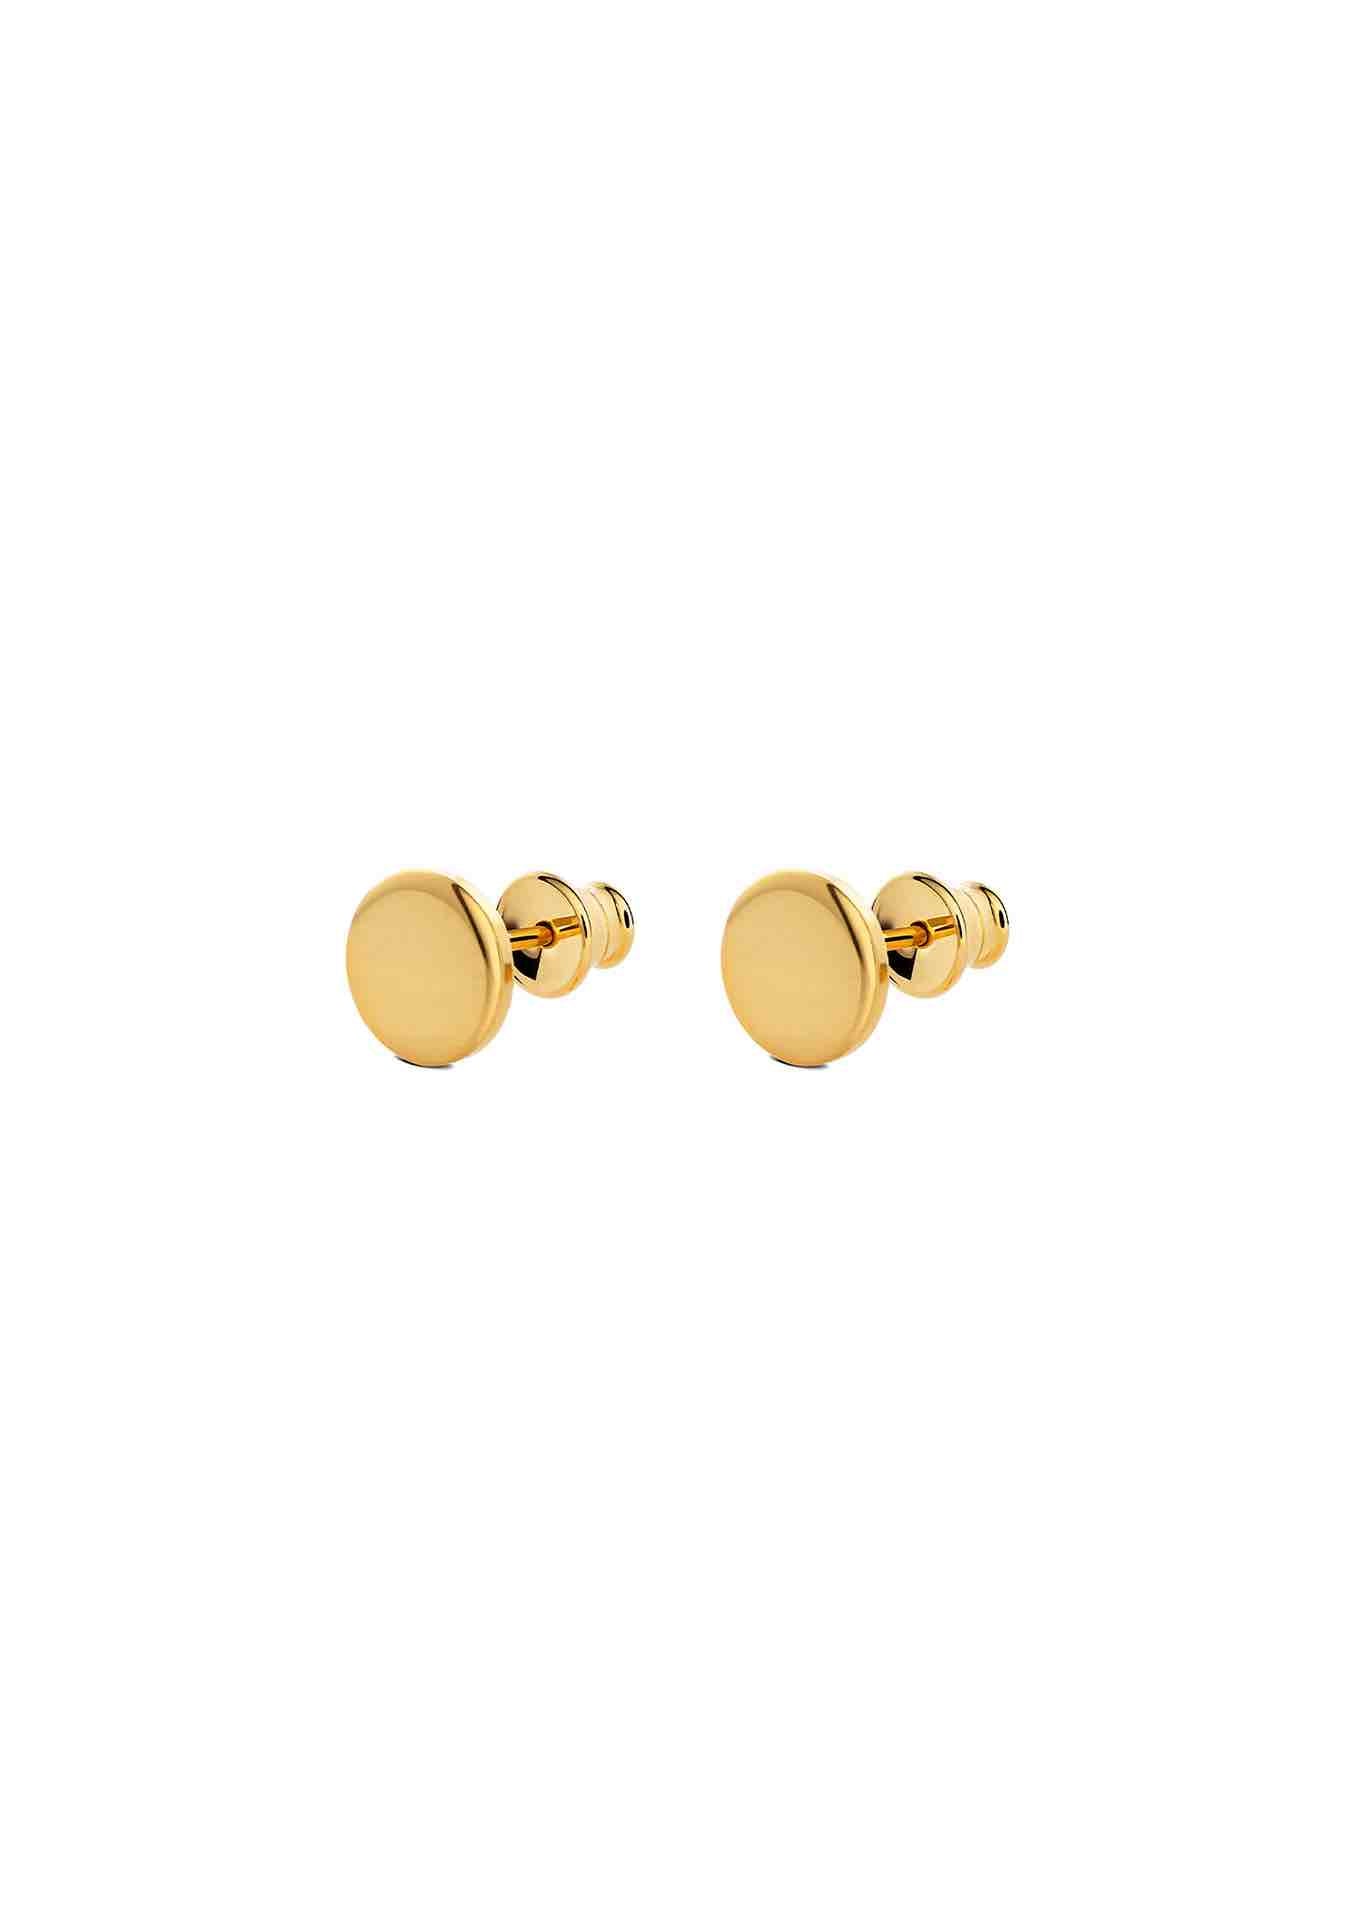 NO MORE accessories Dame Earrings in gold plated sterling silver